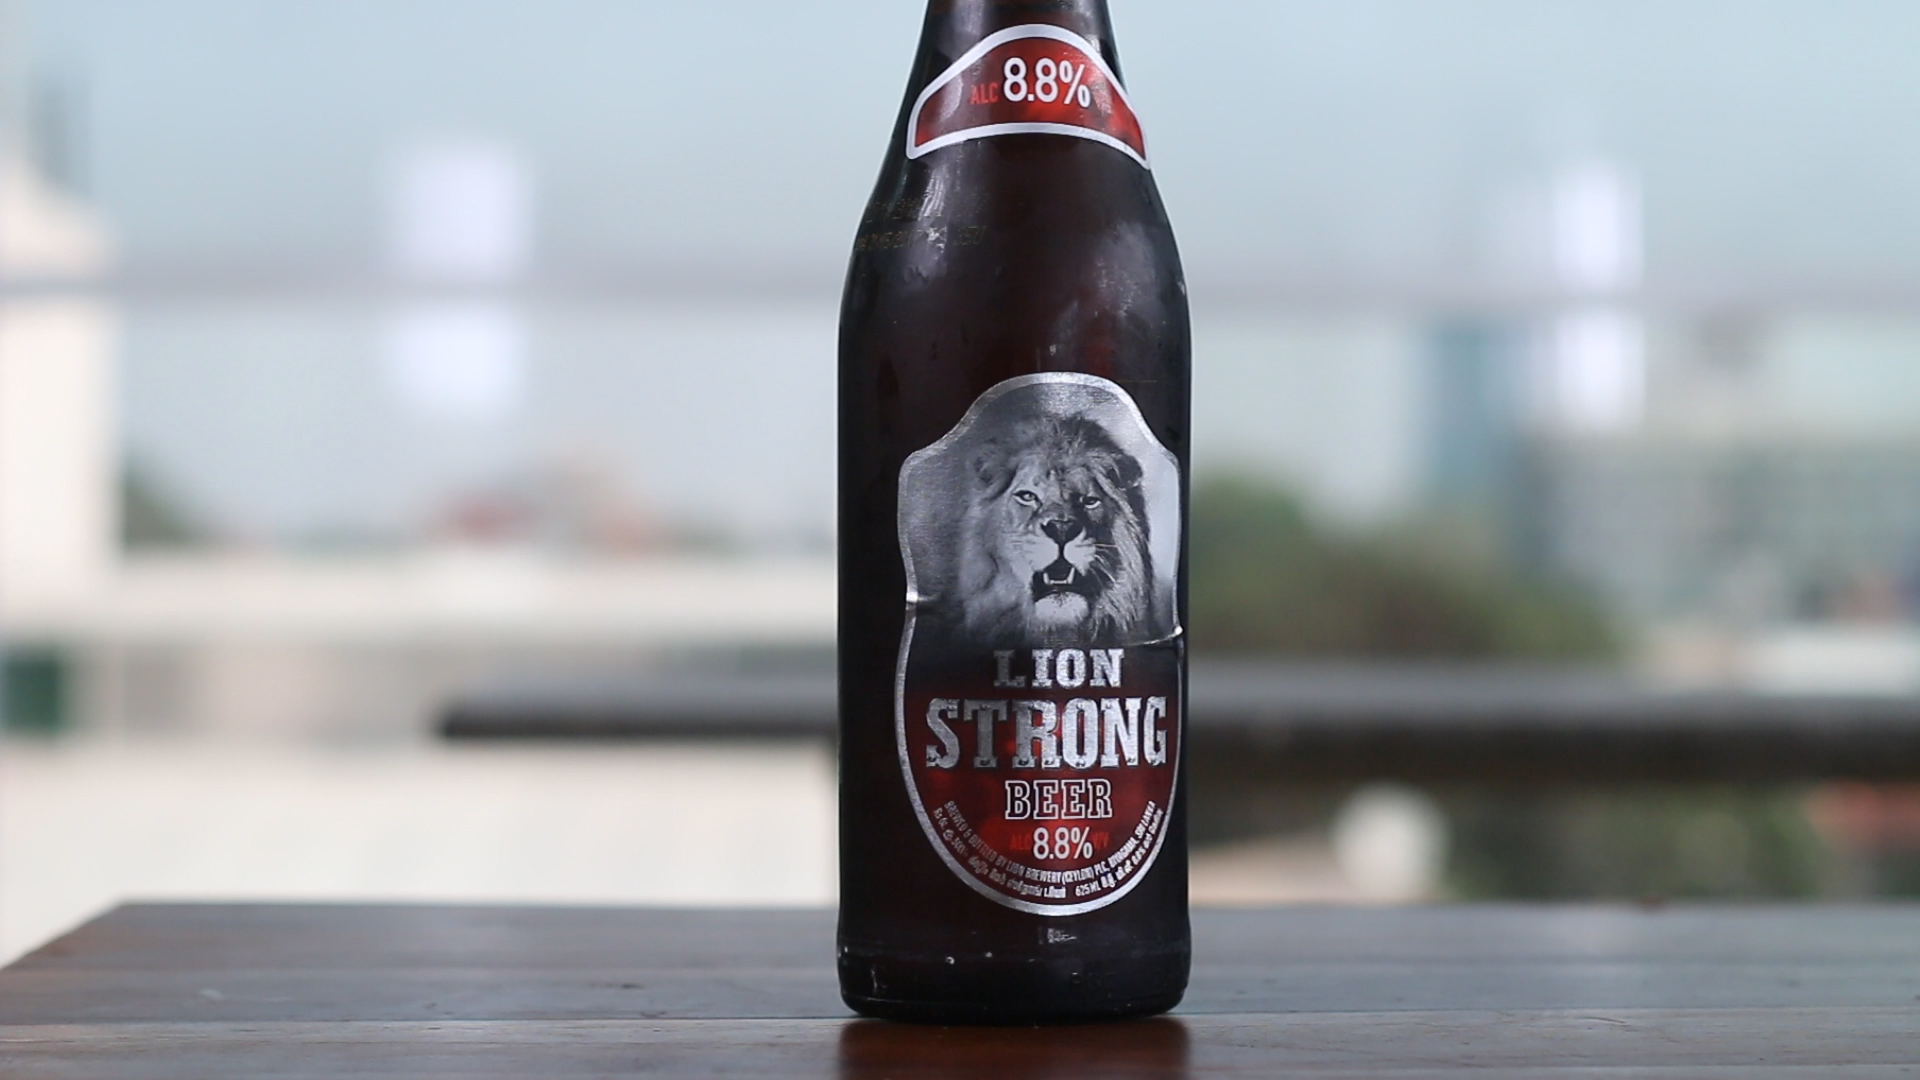 Sri Lankan beer makers to regain market share with tax changes- Fitch